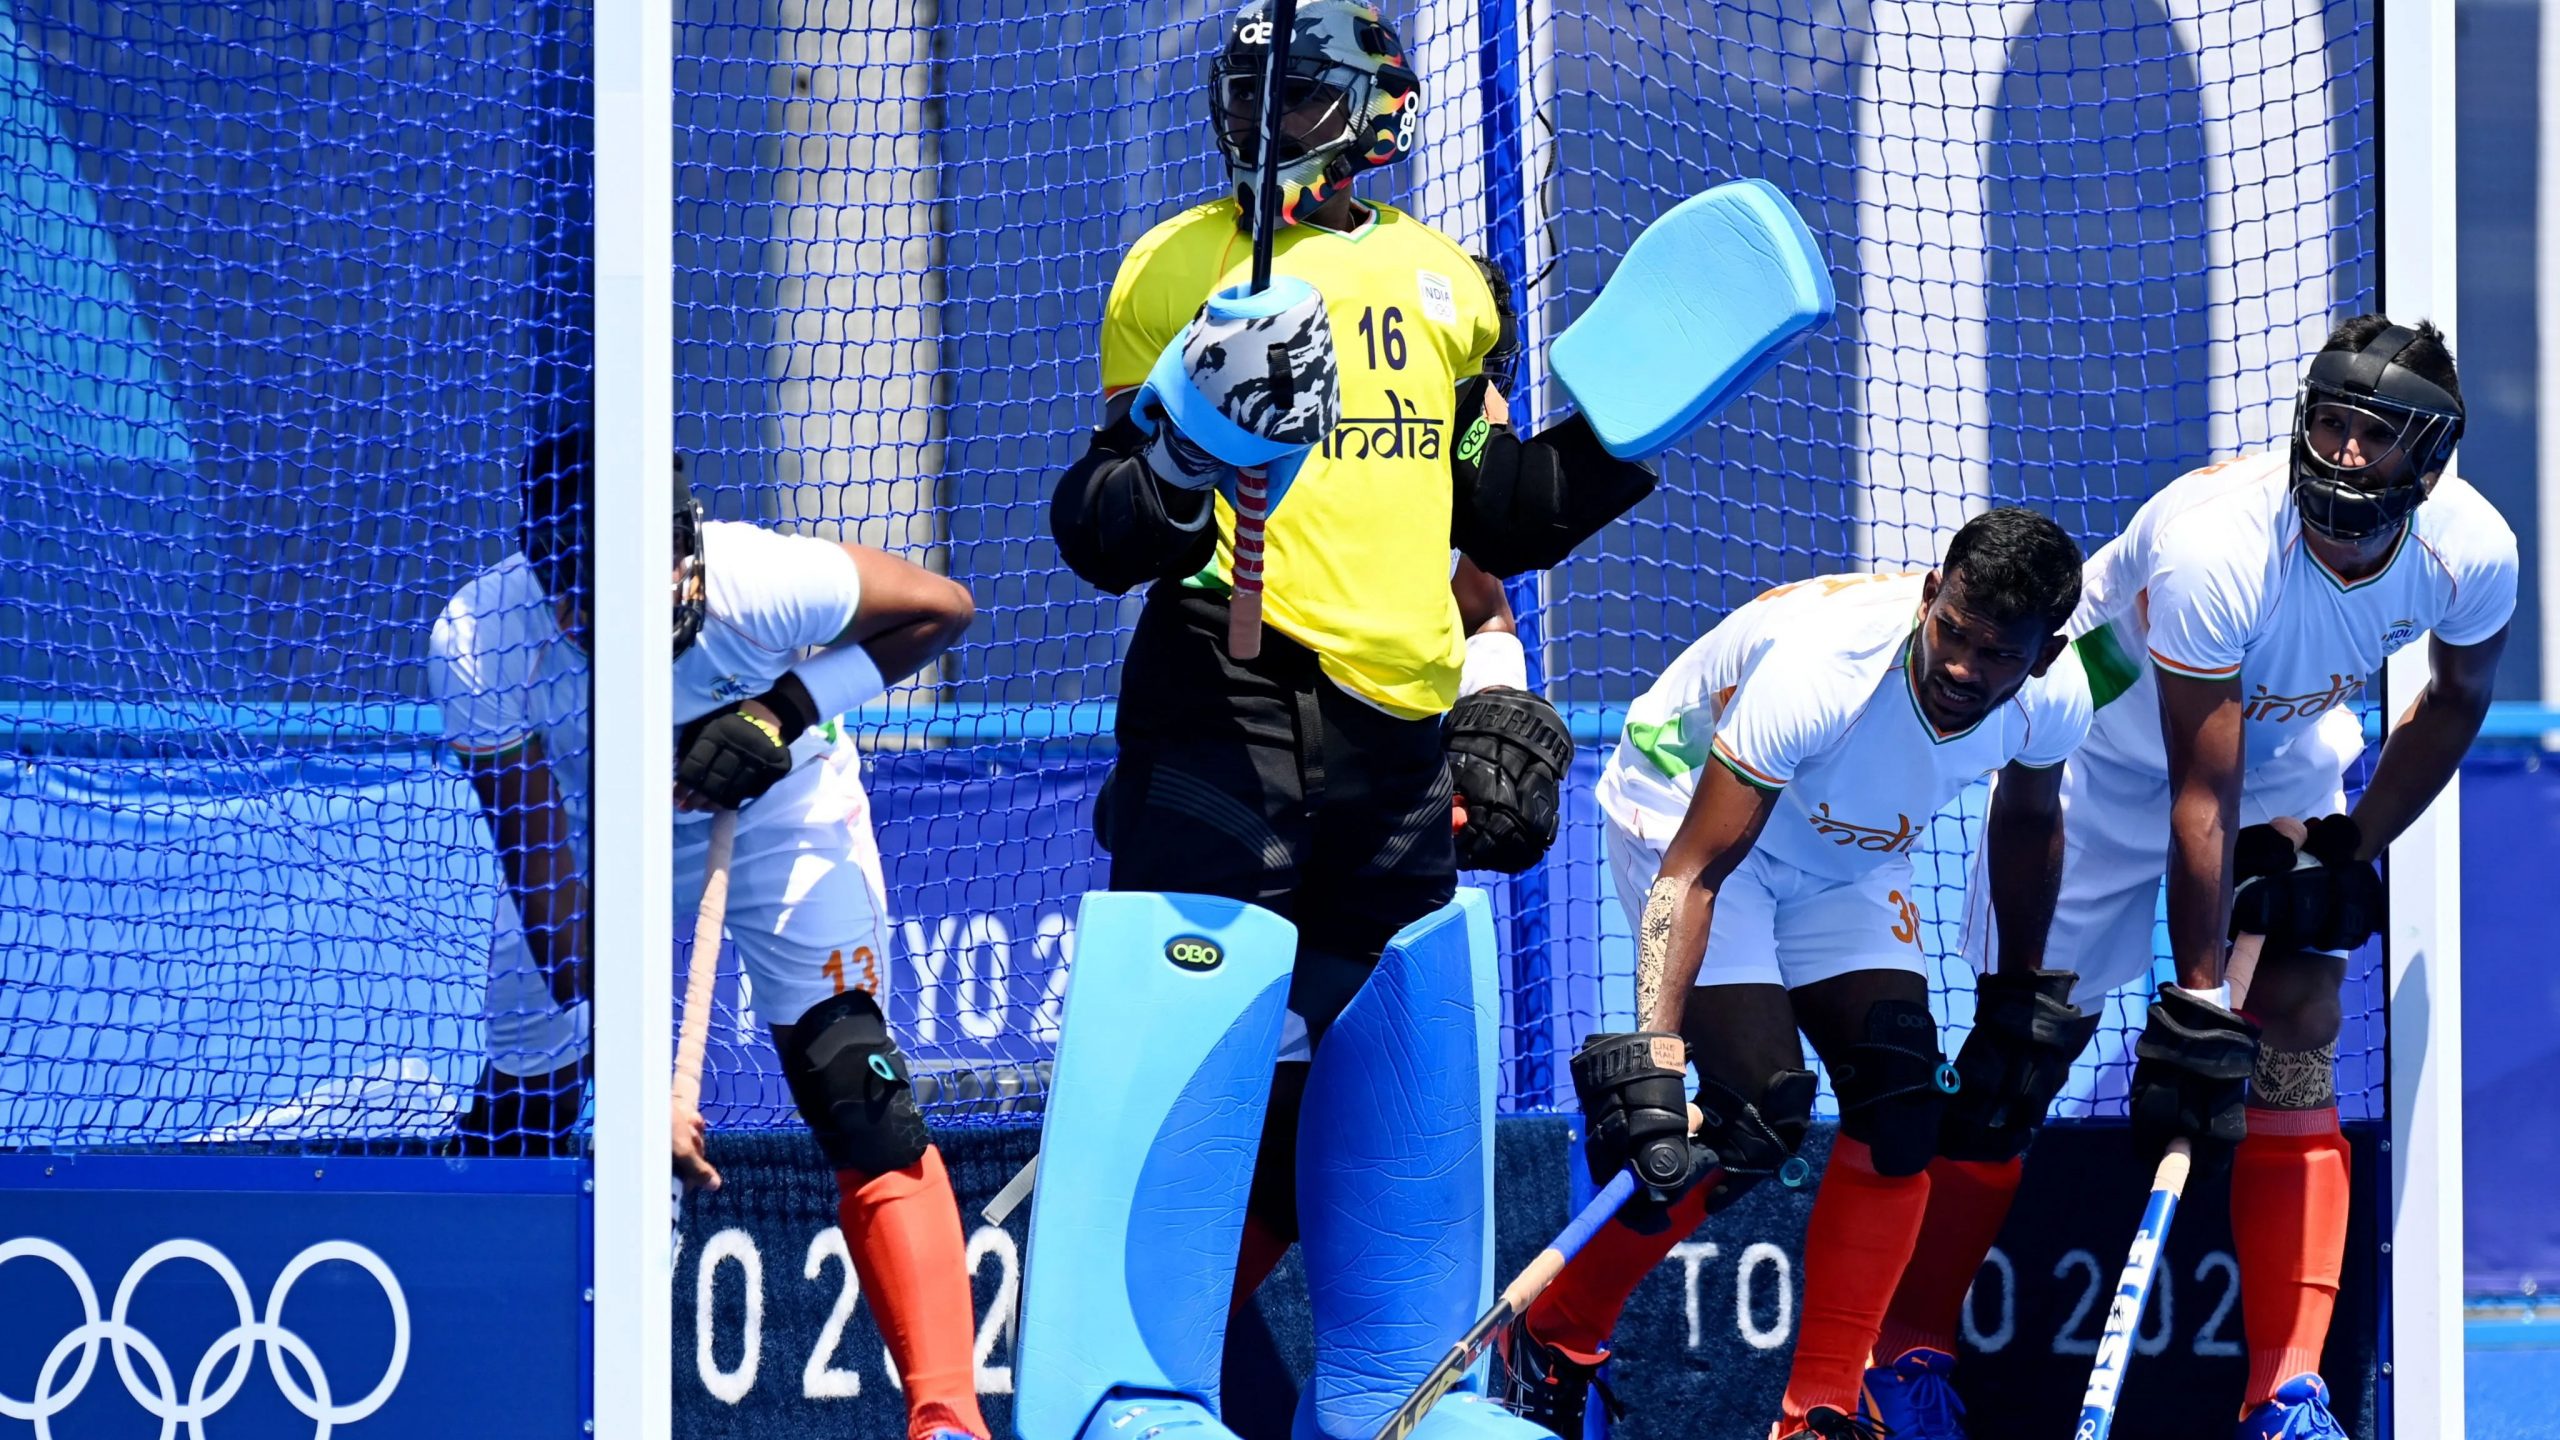 Tokyo Olympics: India beat New Zealand 3-2 in their opening Pool A match